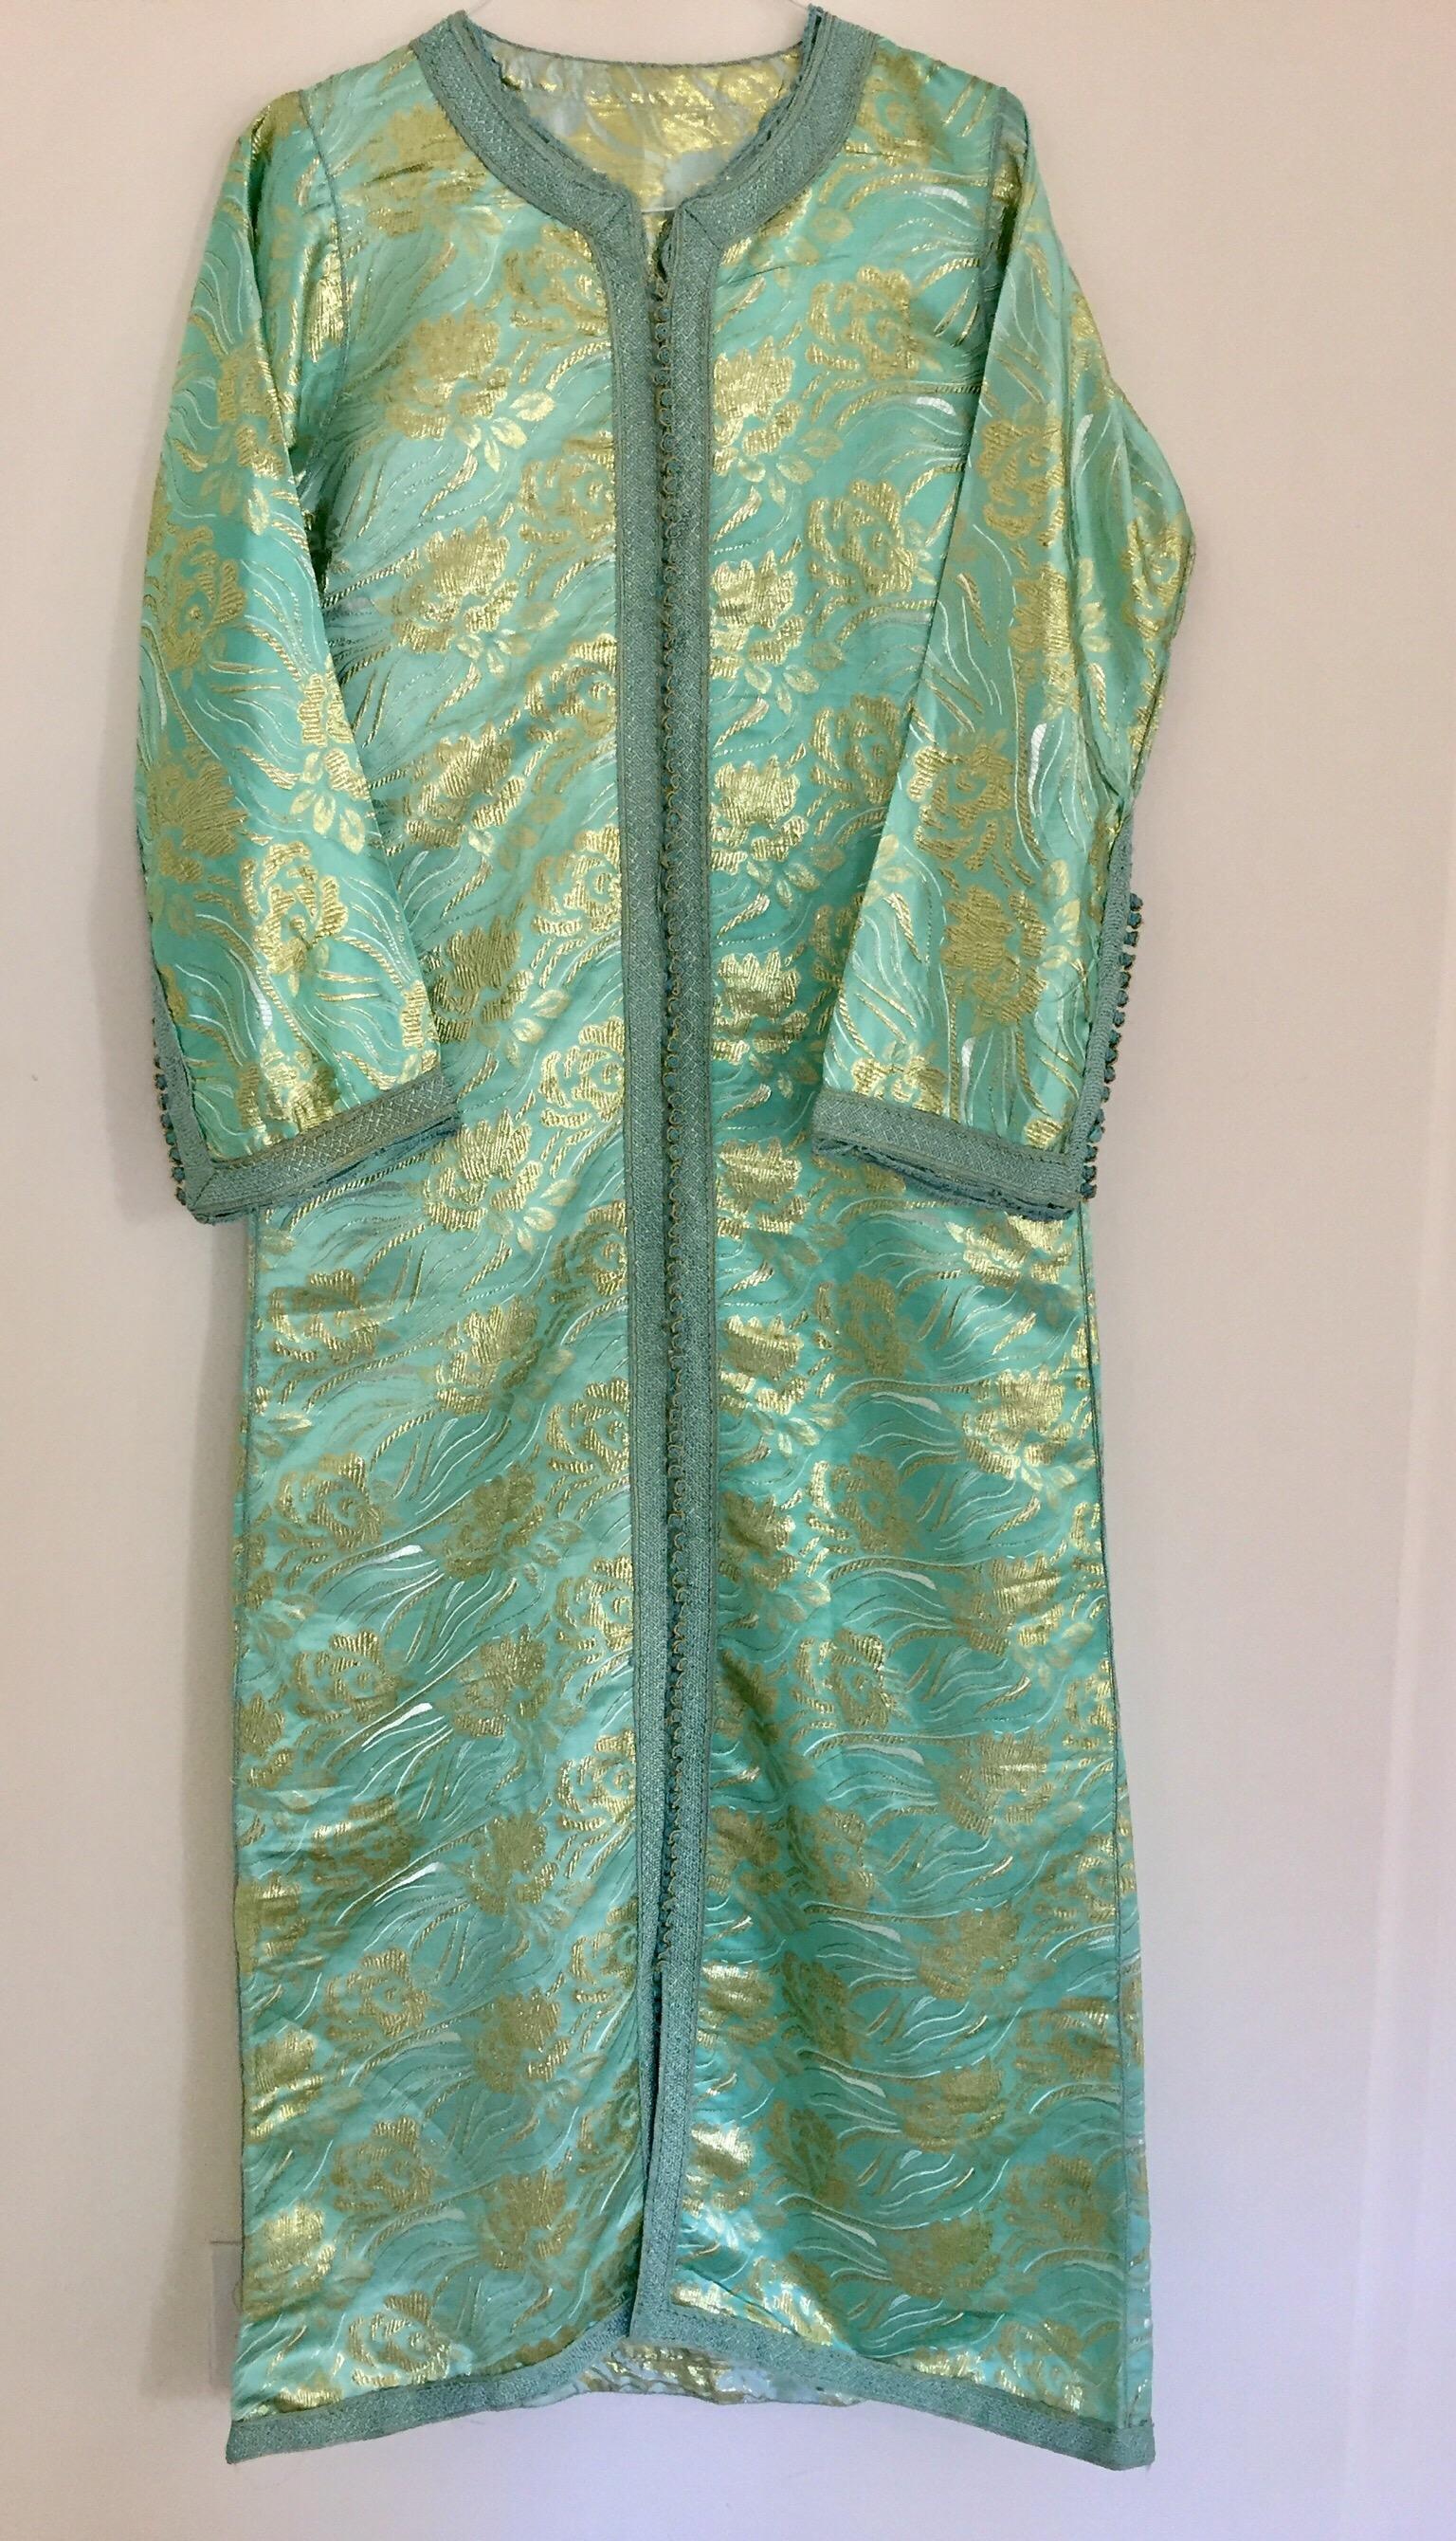 Moroccan Vintage Kaftan in Turquoise and Gold Floral Brocade Metallic Lame - 1 For Sale 8